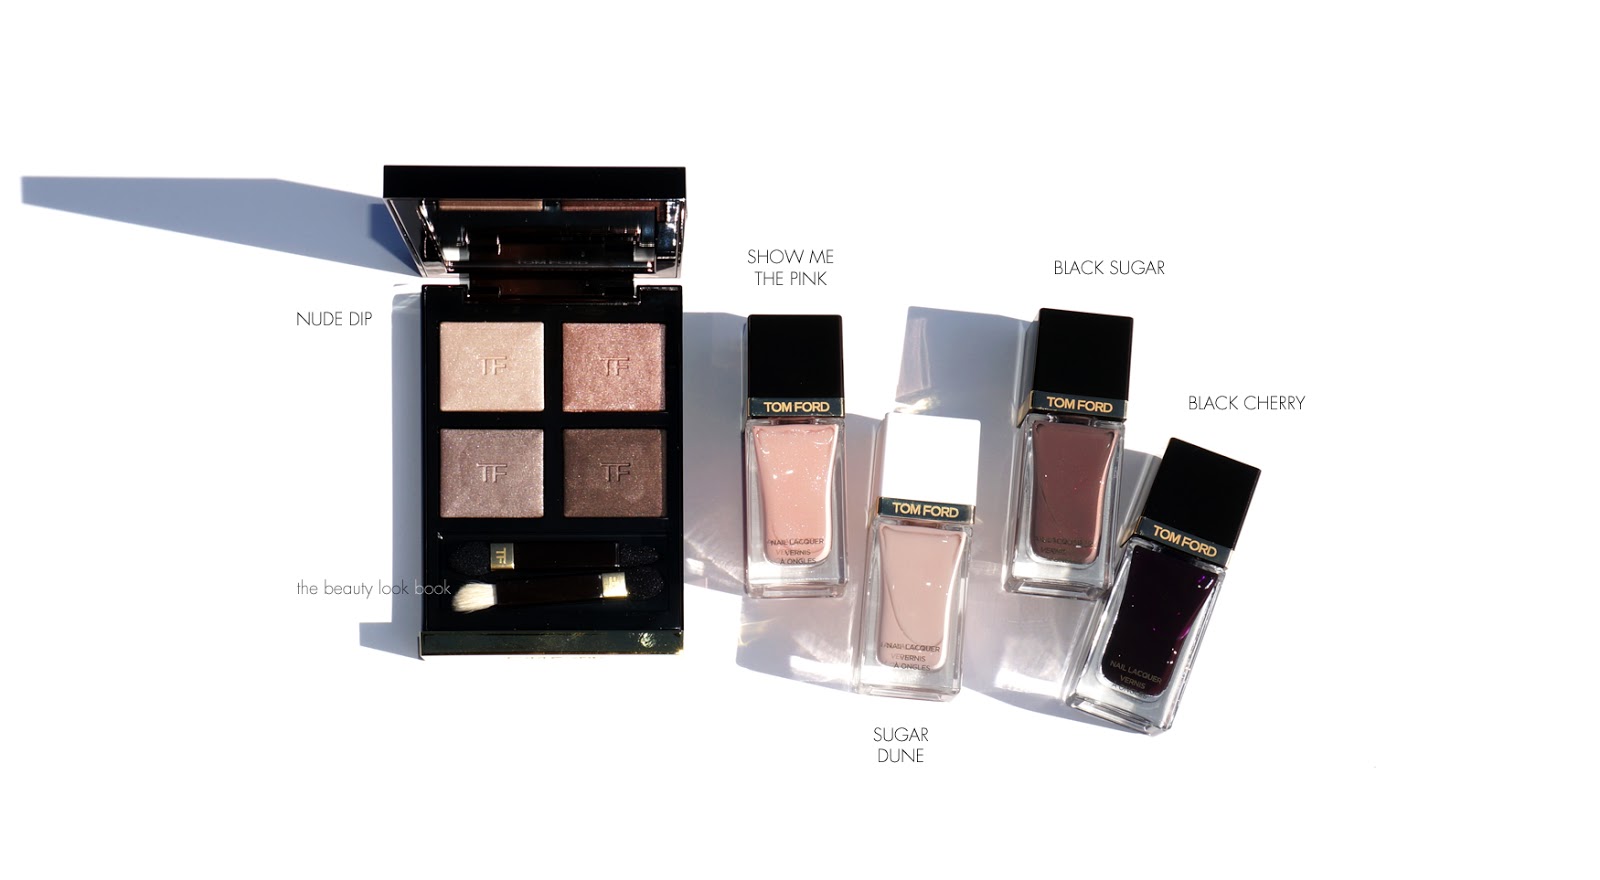 Tom Ford Beauty Relaunches: Nude Dip, Sugar Dune, Black Sugar